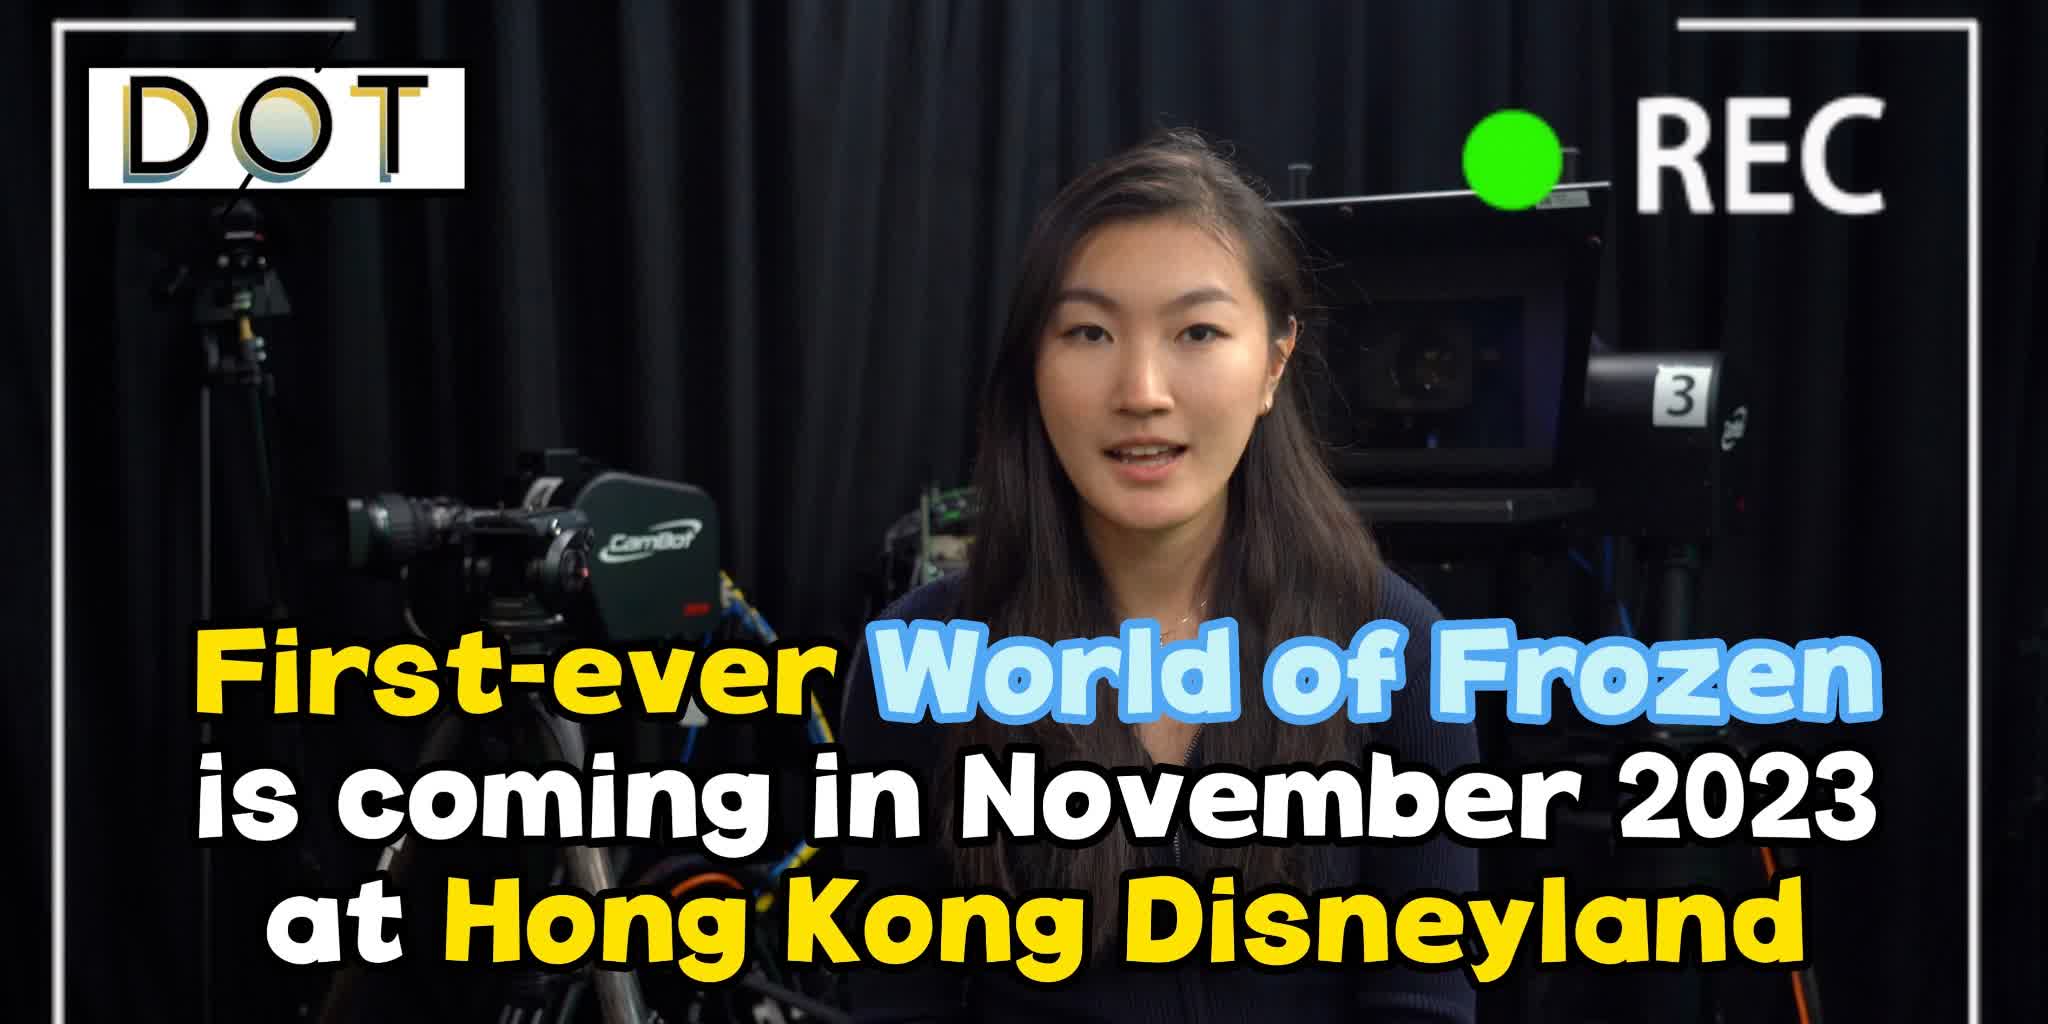 Watch This | First-ever World of Frozen is coming in November 2023 at Hong Kong Disneyland